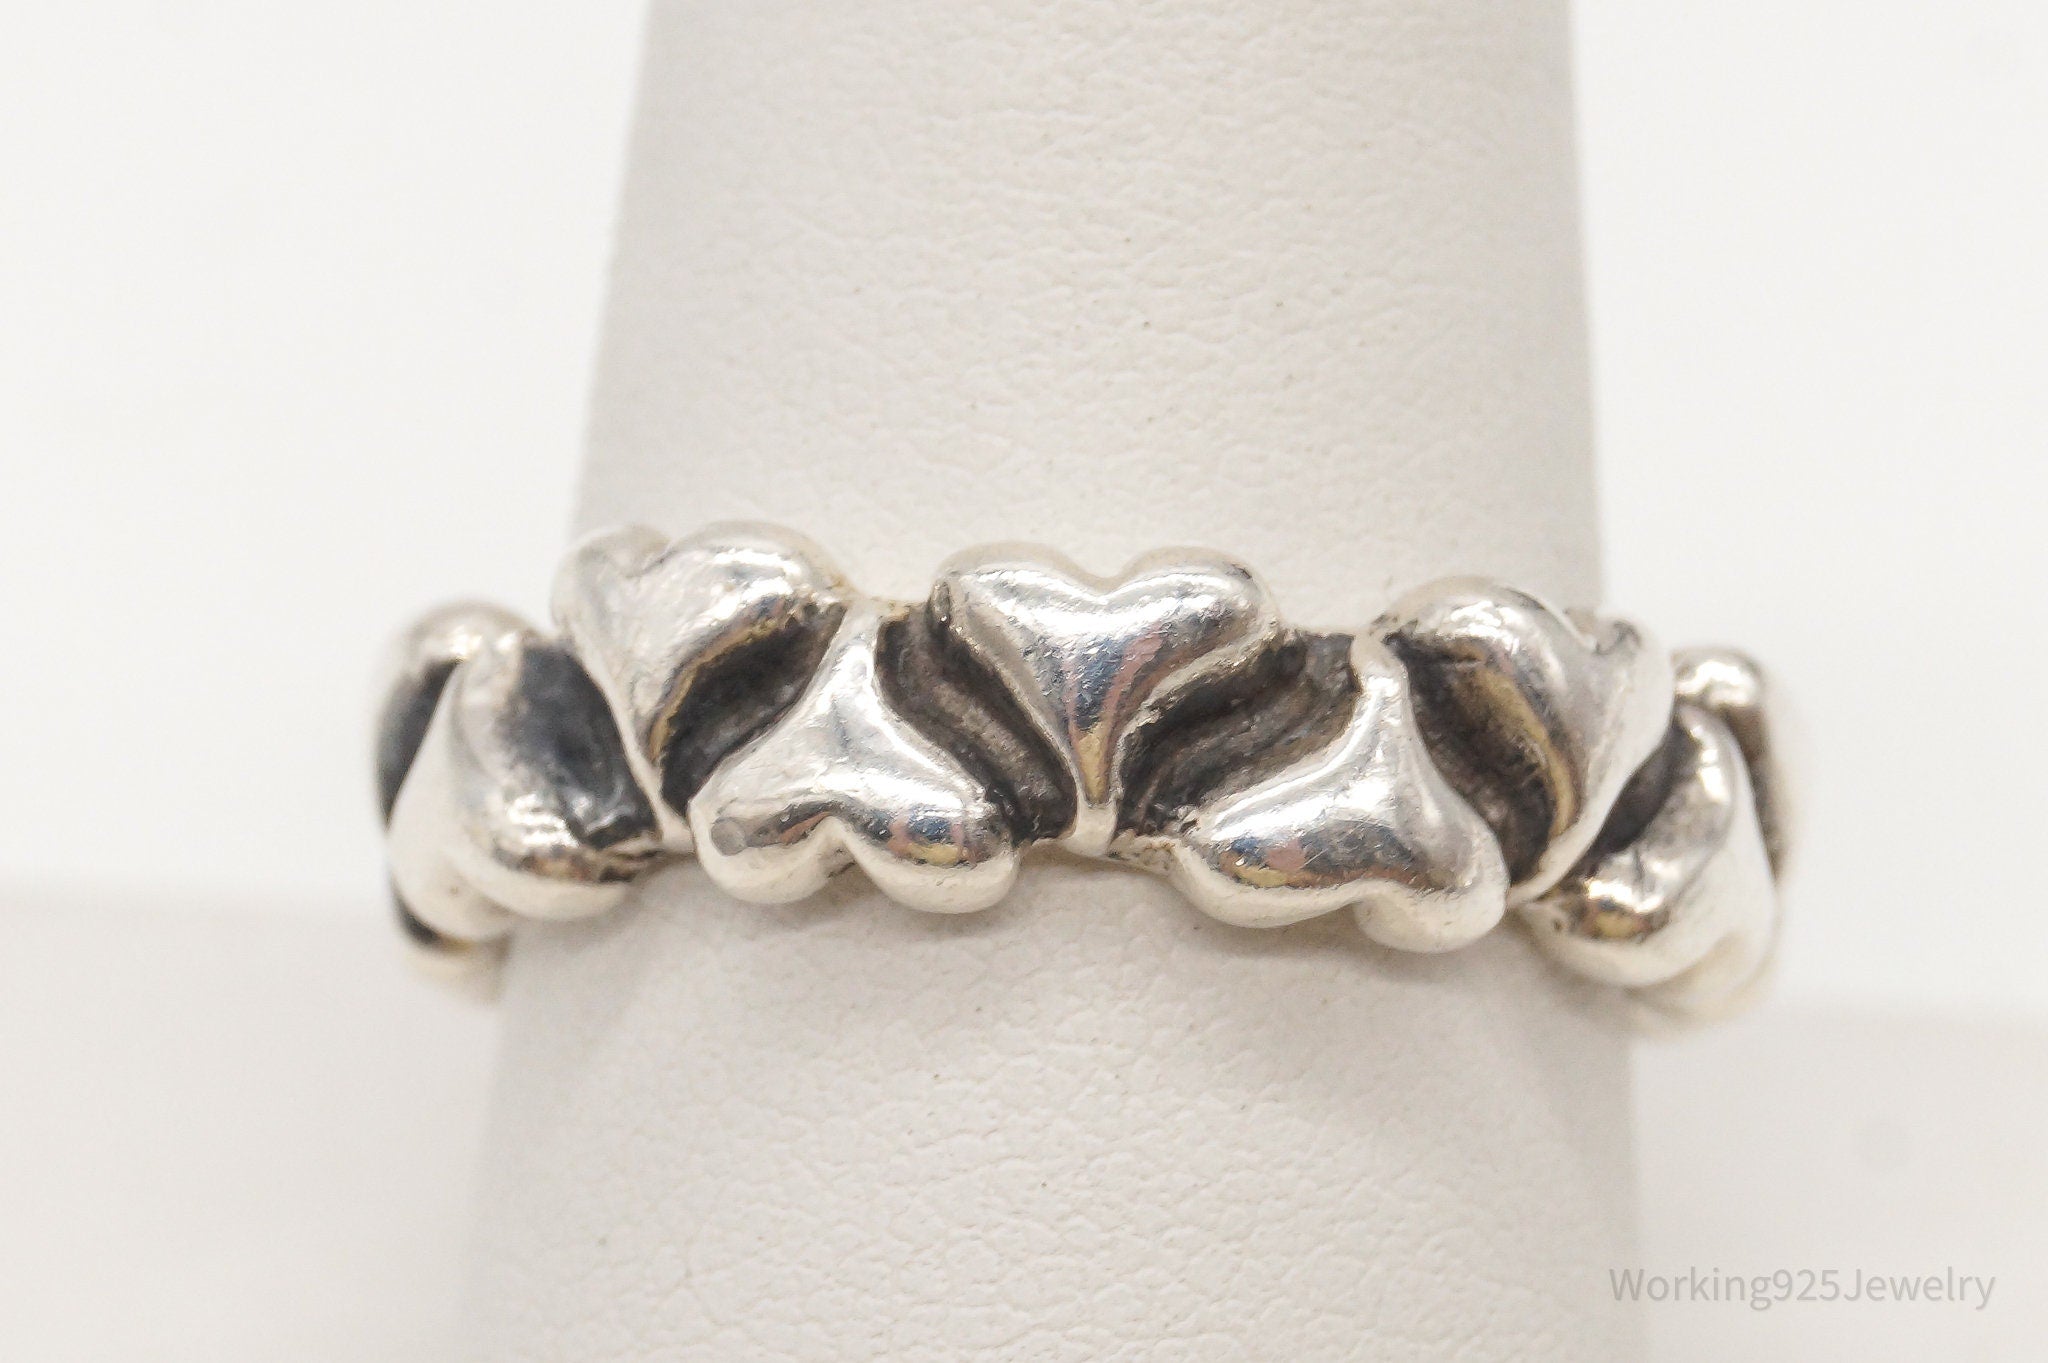 Claudia Agudelo EXEX Collection Hearts Sterling Silver Ring - Size 8.75